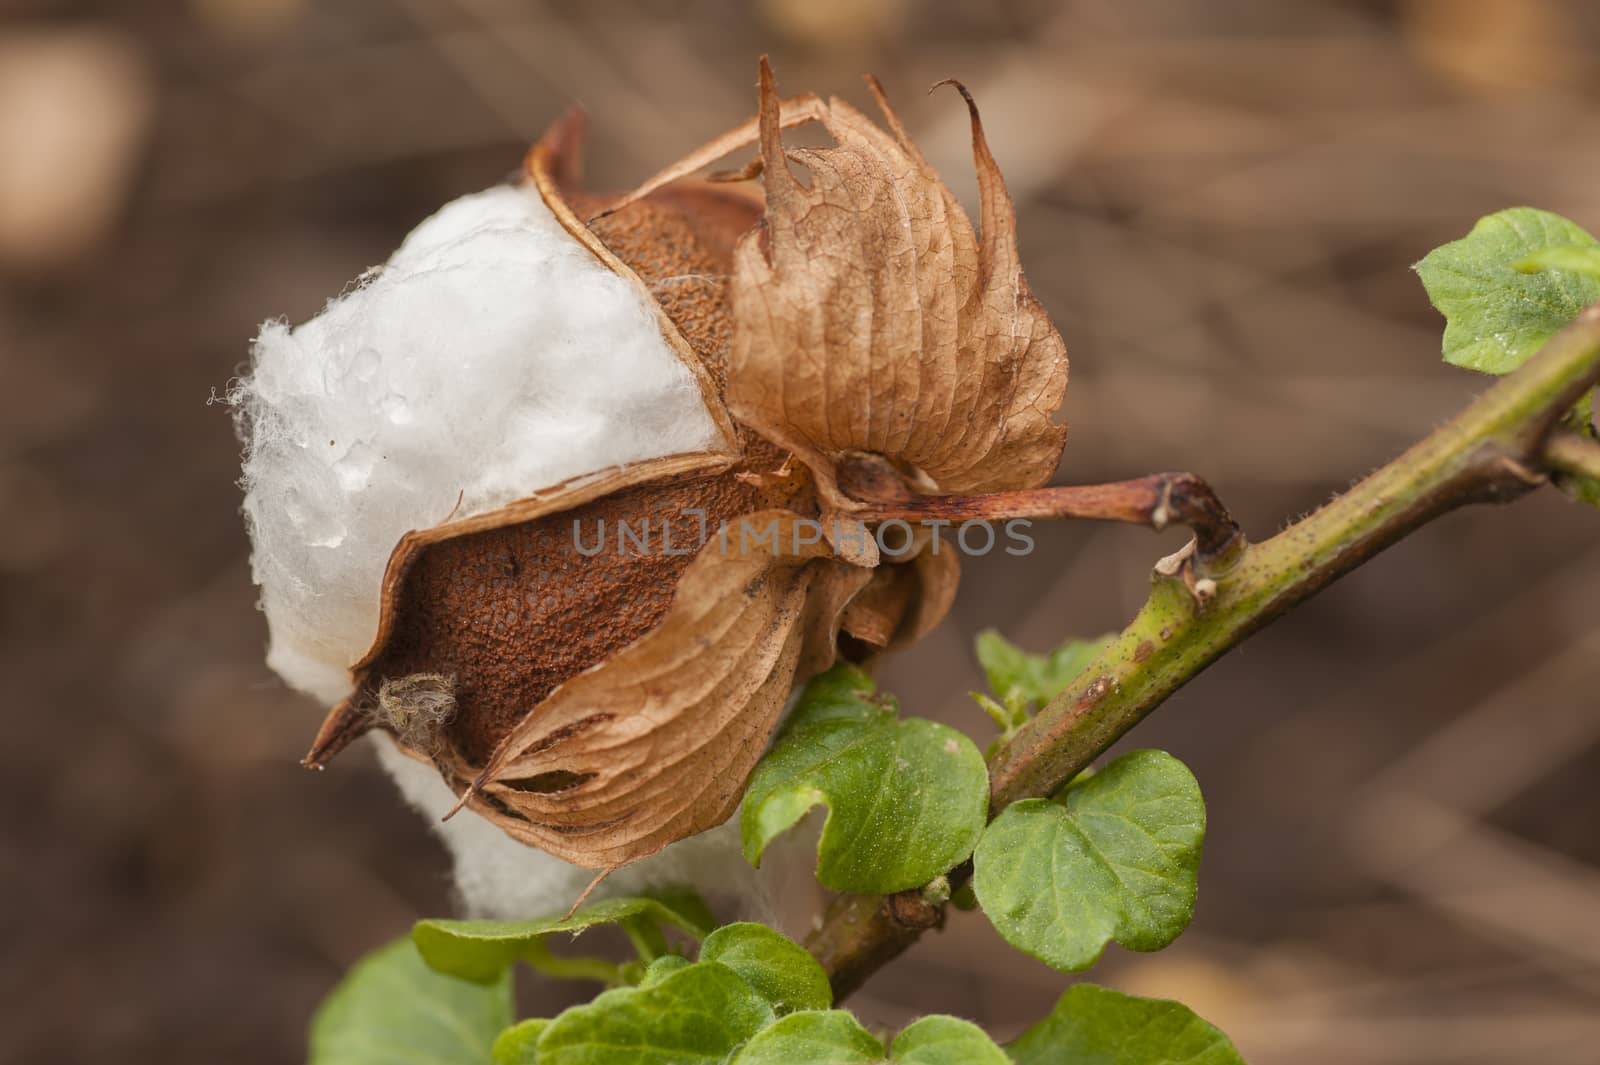 Exposed flower bud of Gossypium herbaceum, commonly known as Levant cotton, species of cotton native to the semi-arid regions of sub-Saharan Africa and Arabia